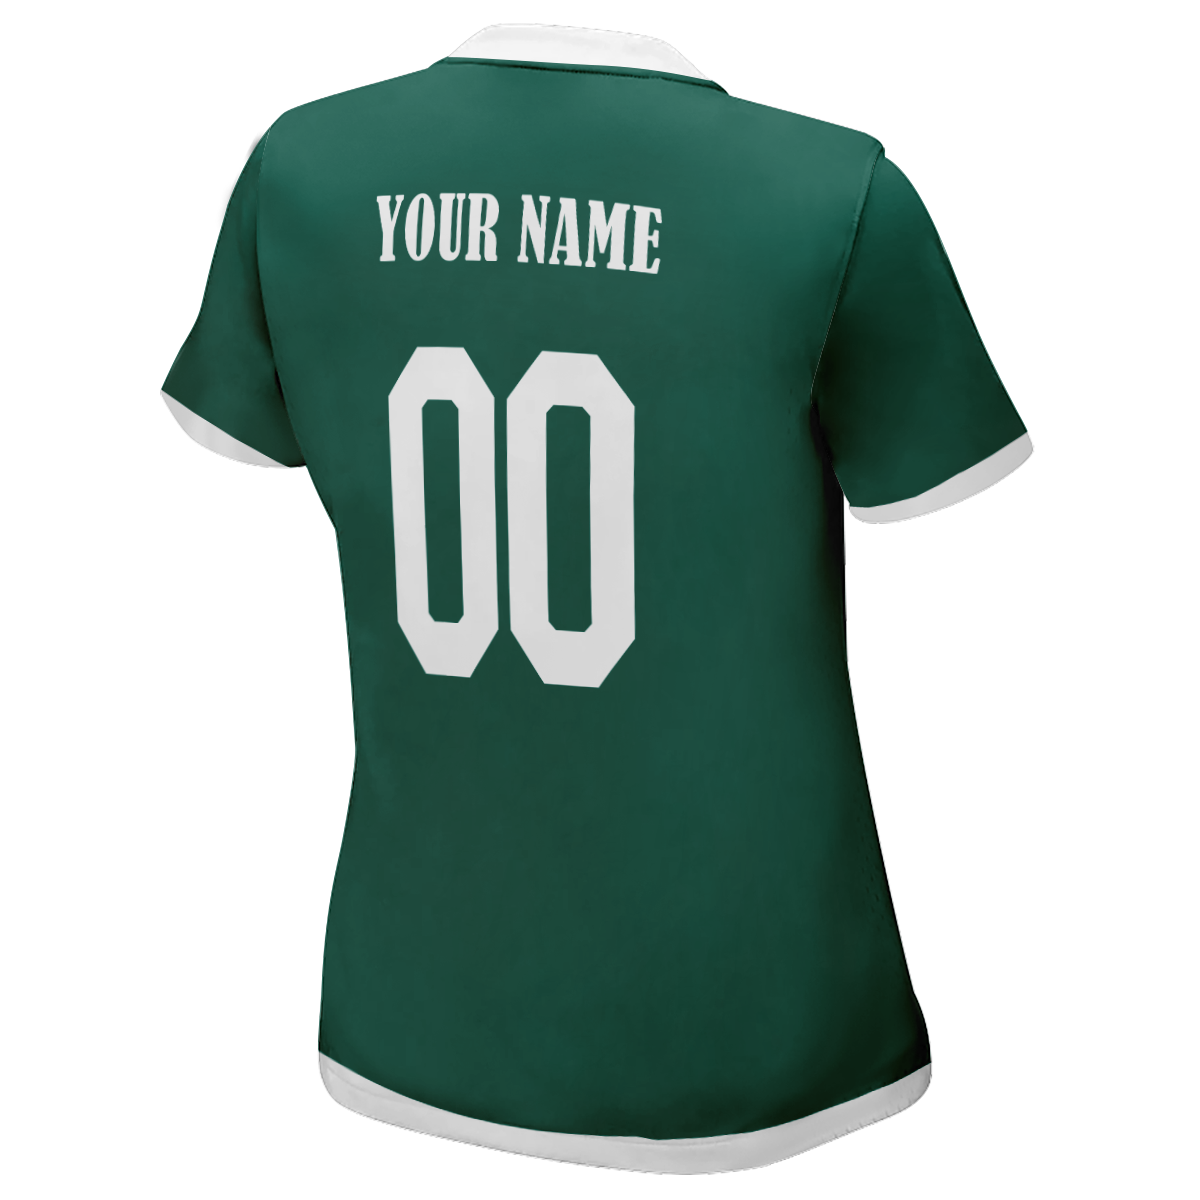 Women's Reversible Mexico World Cup Custom Soccer Jersey With Picture